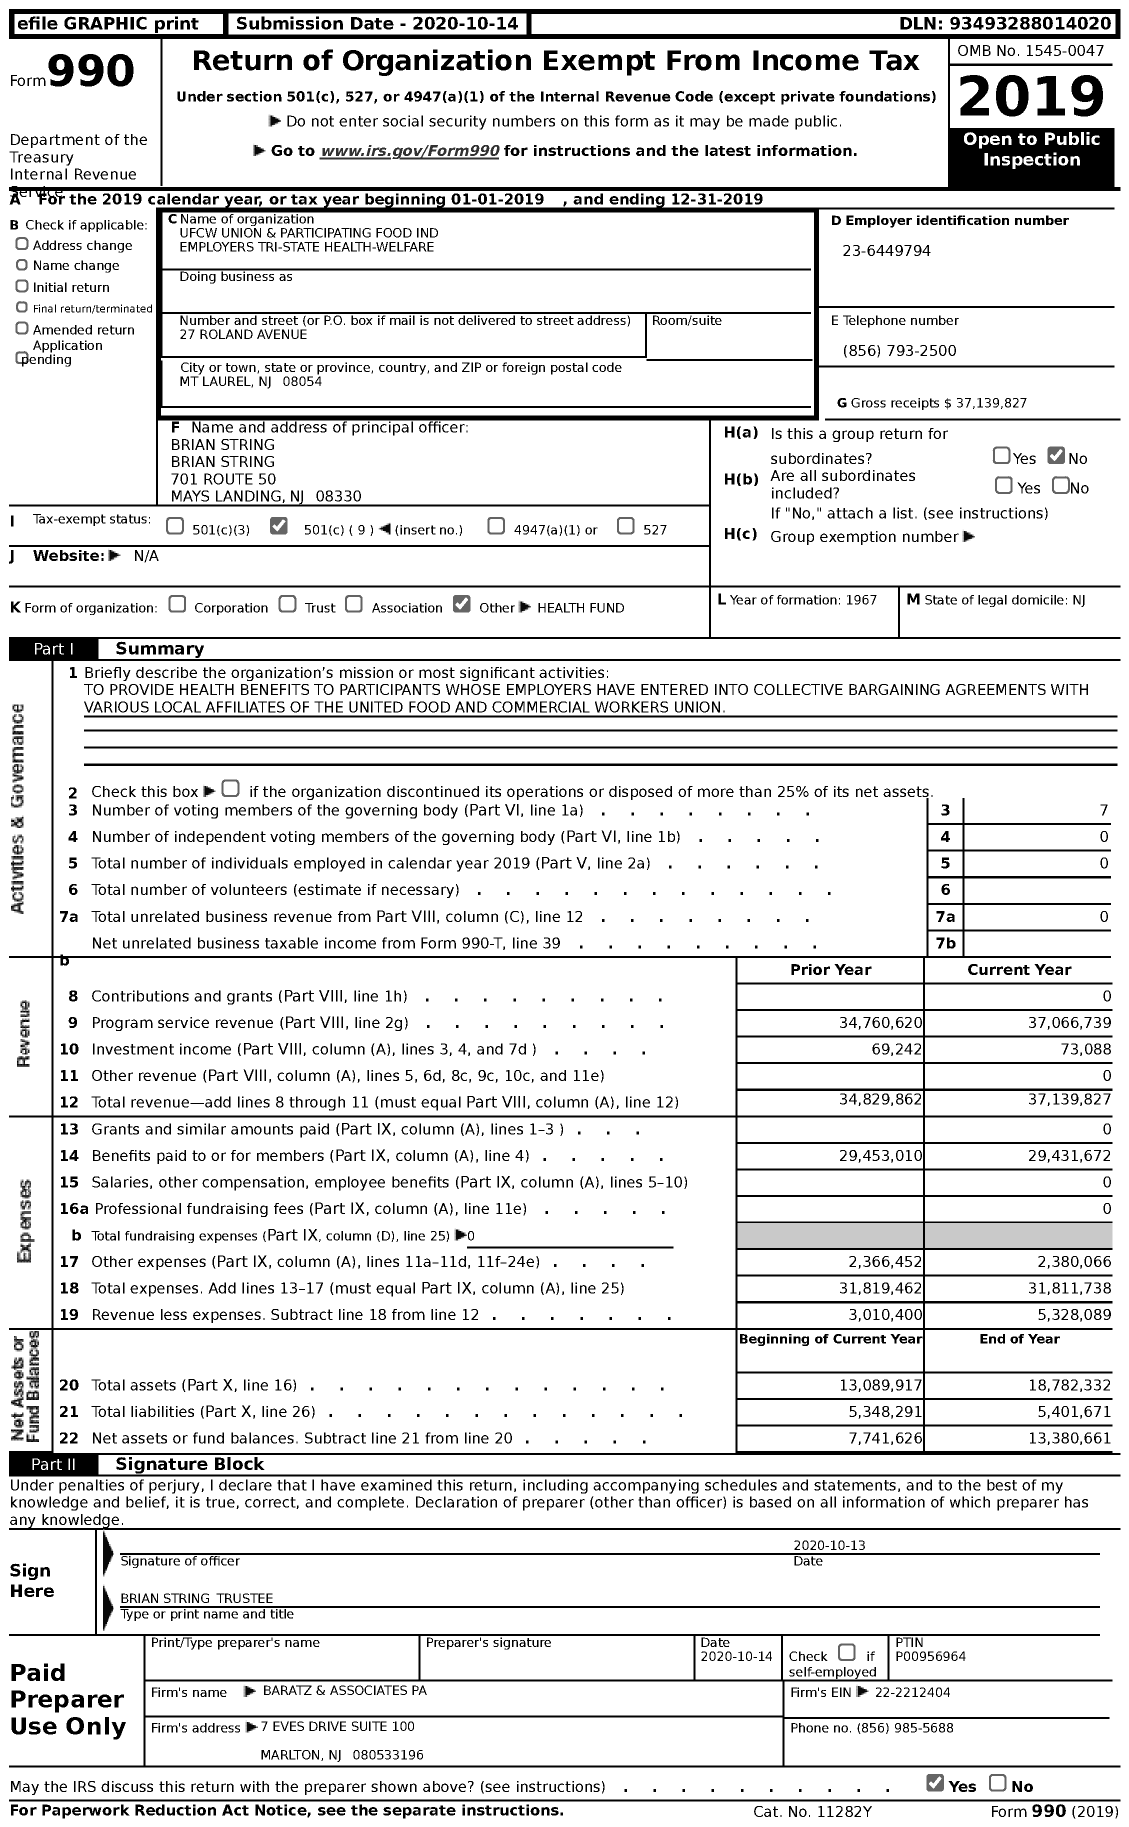 Image of first page of 2019 Form 990 for Ufcw Union and Participating Food Ind Employers Tri-State Health-Welfare